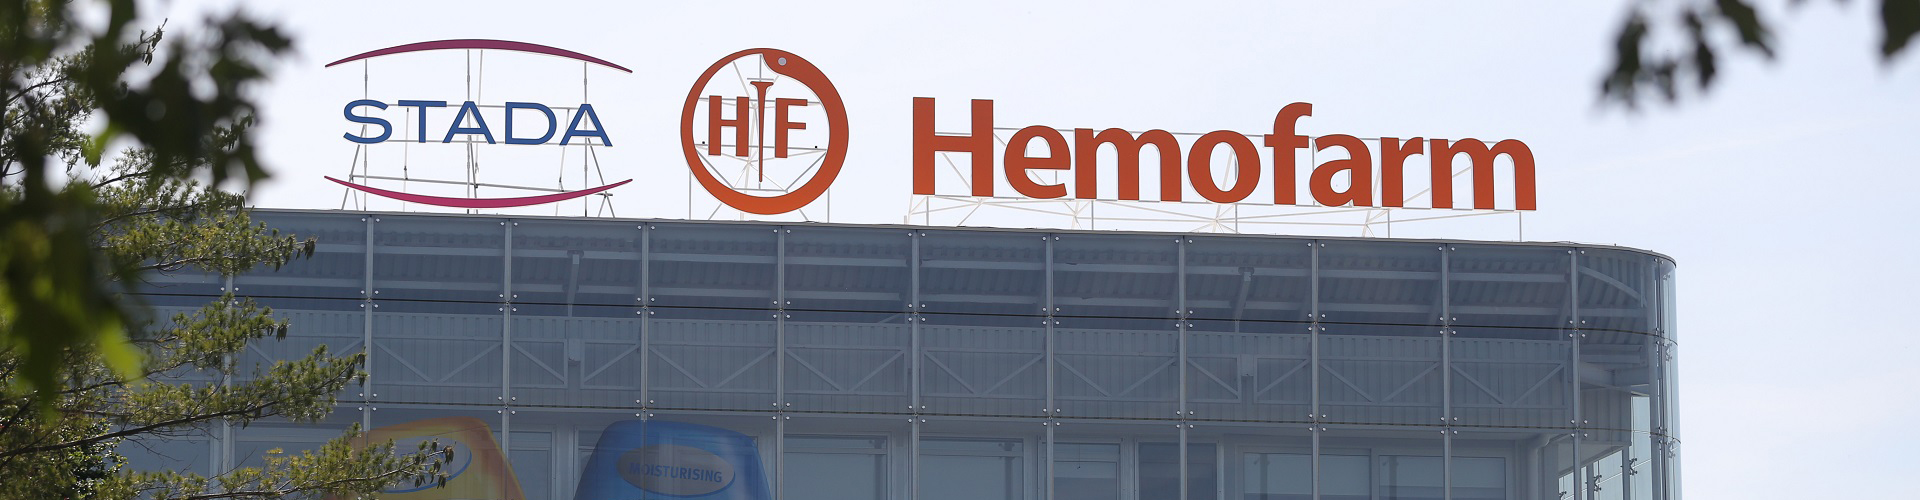 <h1>Stada Group / Hemofarm</h1>
<p><i>Serbia offers an ideal base for business activities throughout Eastern Europe. A strong argument for investing in Serbia is also the access to highly qualified employees, and thus the ability to produce and develop products of the highest quality economically.</i><br><br>
<strong>Dr. Ronald Seeliger, CEO, Stada Group/Hemofarm</strong>
</p>